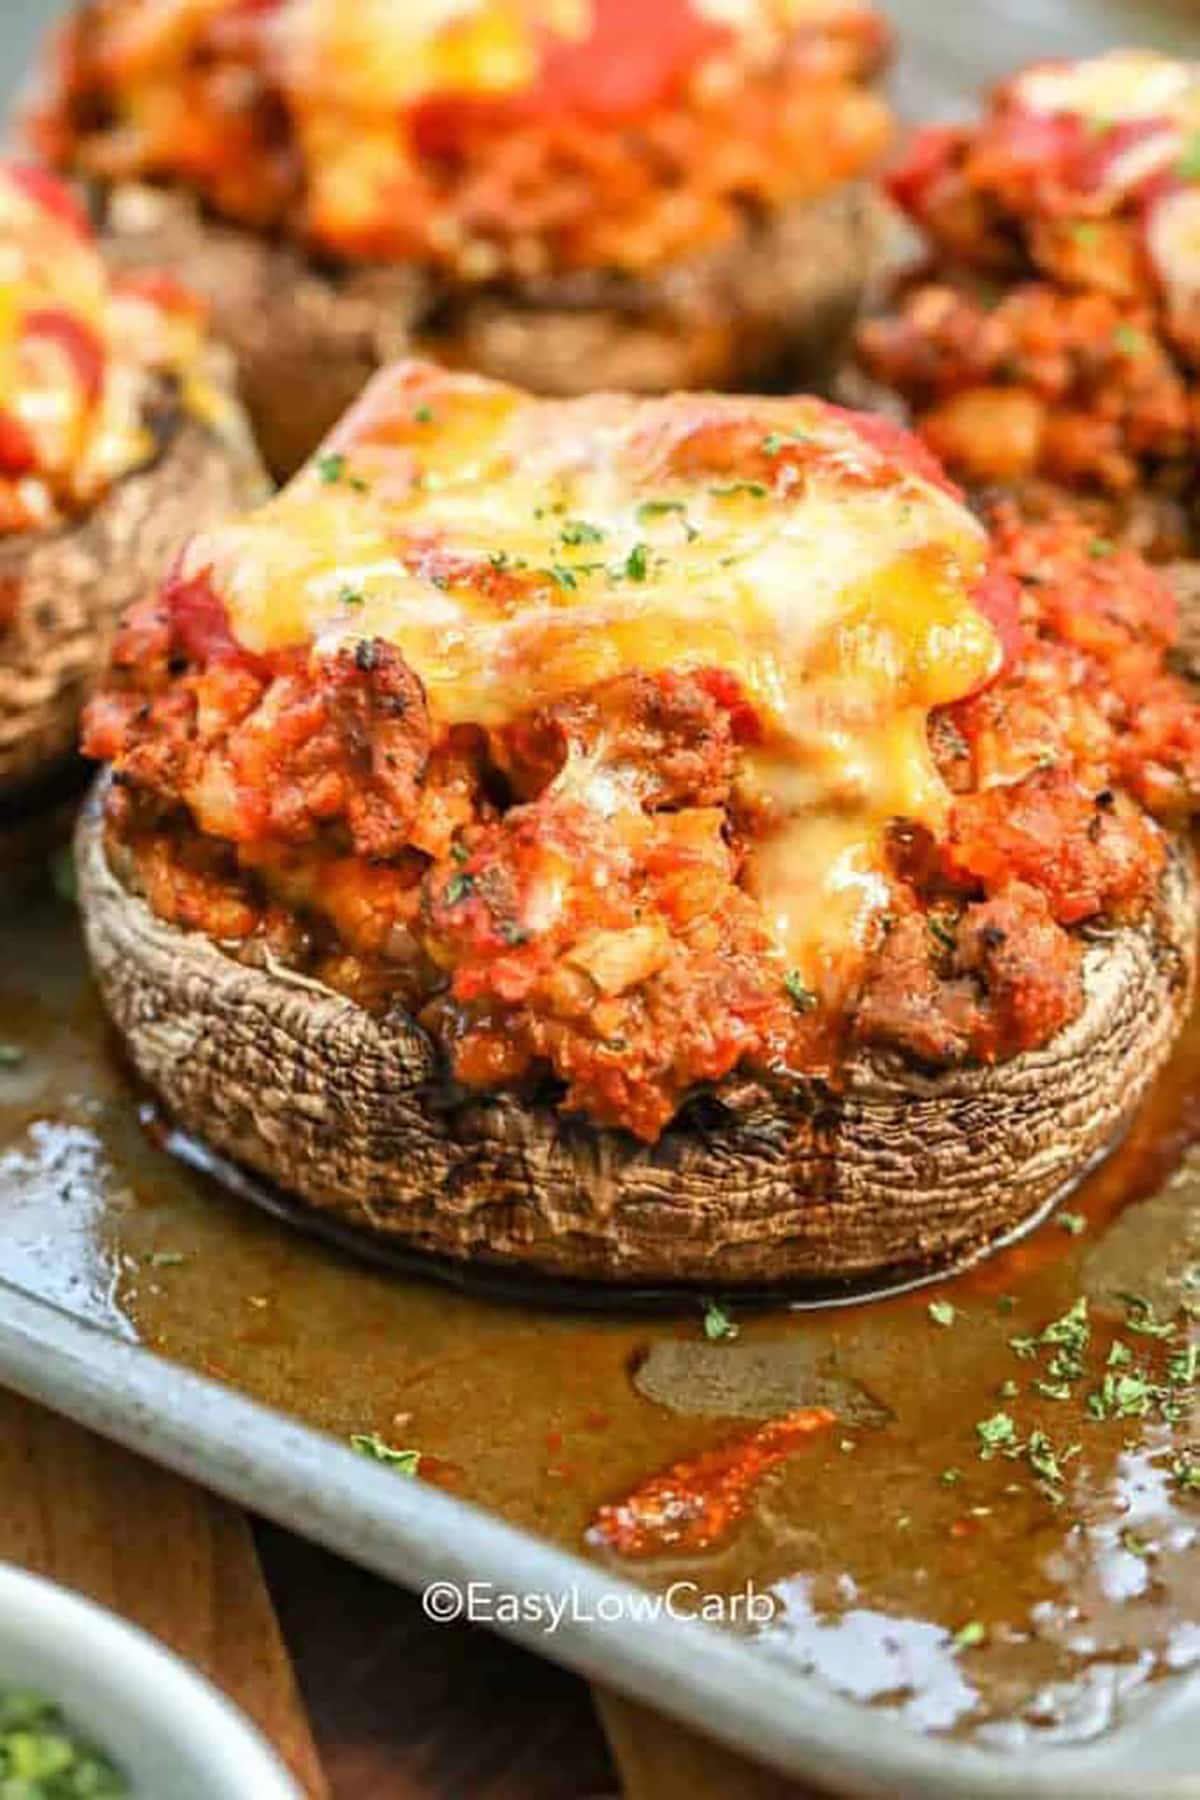 baked stuffed portobello mushroom recipe with melted cheese on the top